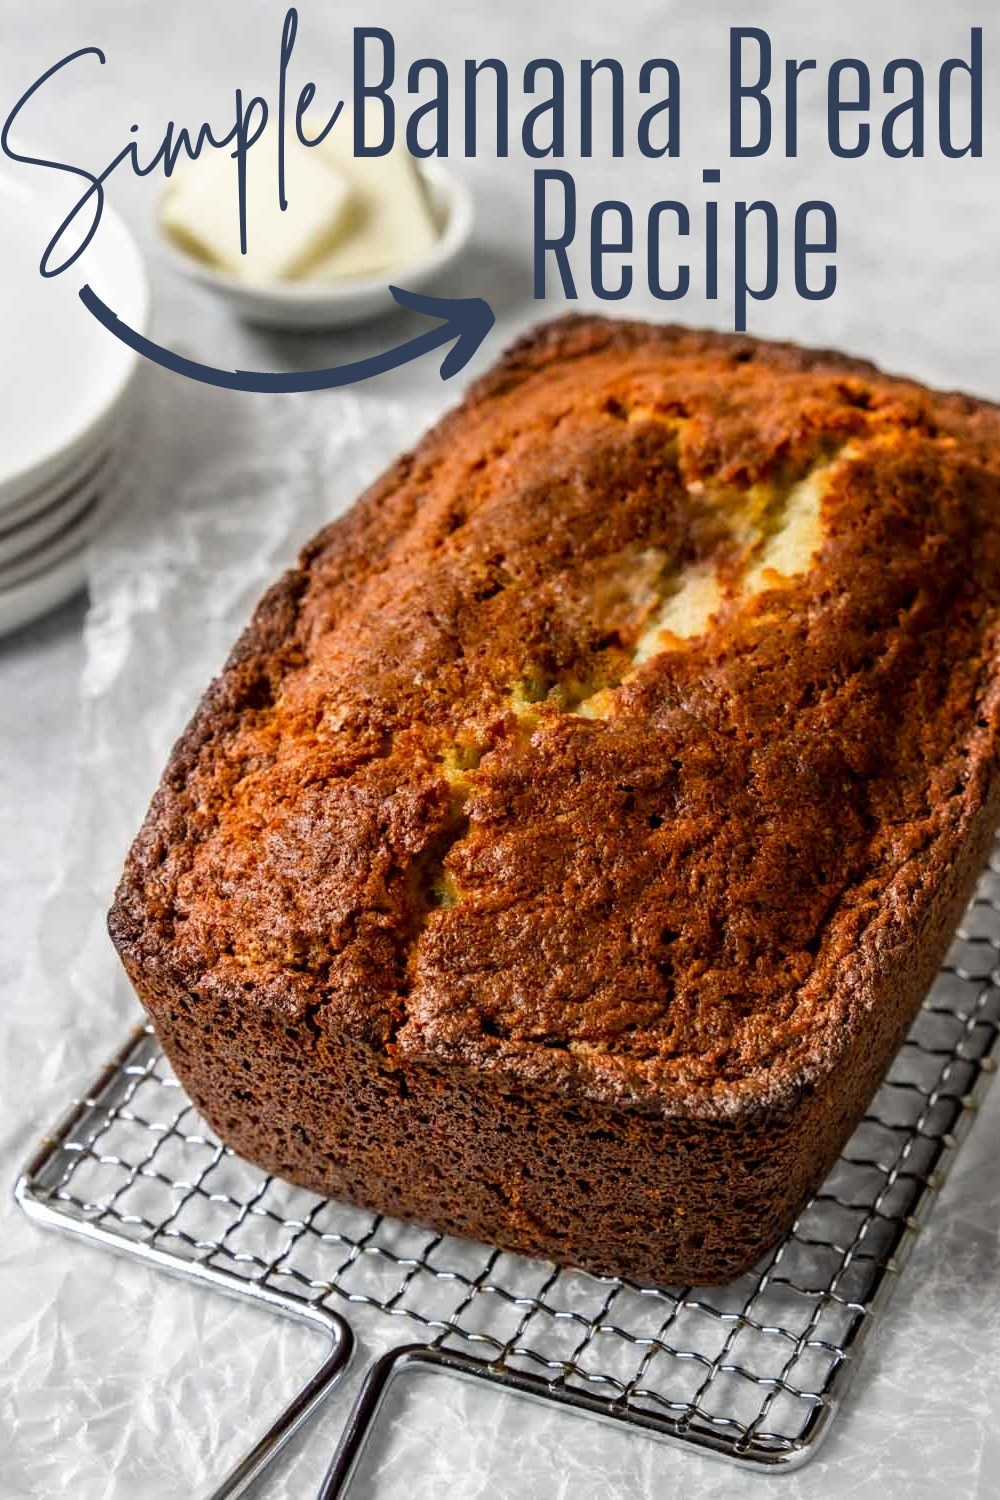 Pinterest image of banana bread loaf with text overlay